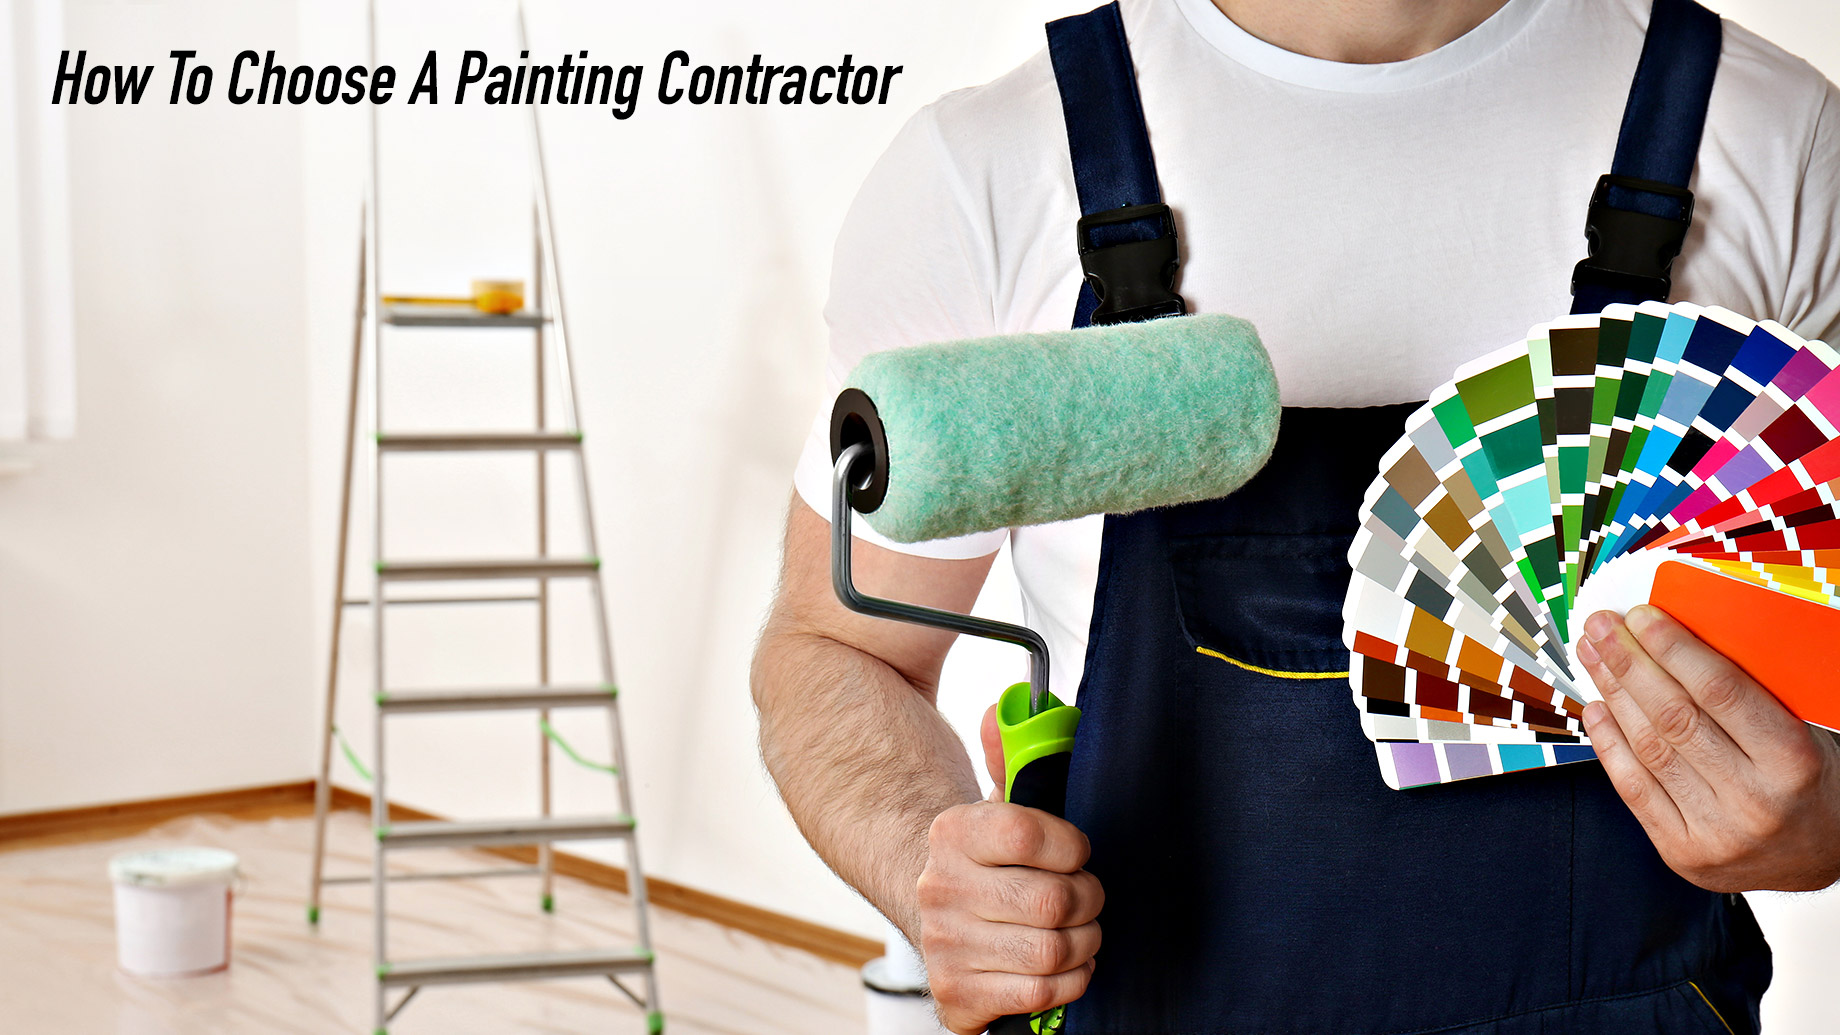 How To Choose A Painting Contractor - The Complete Guide For Homeowners